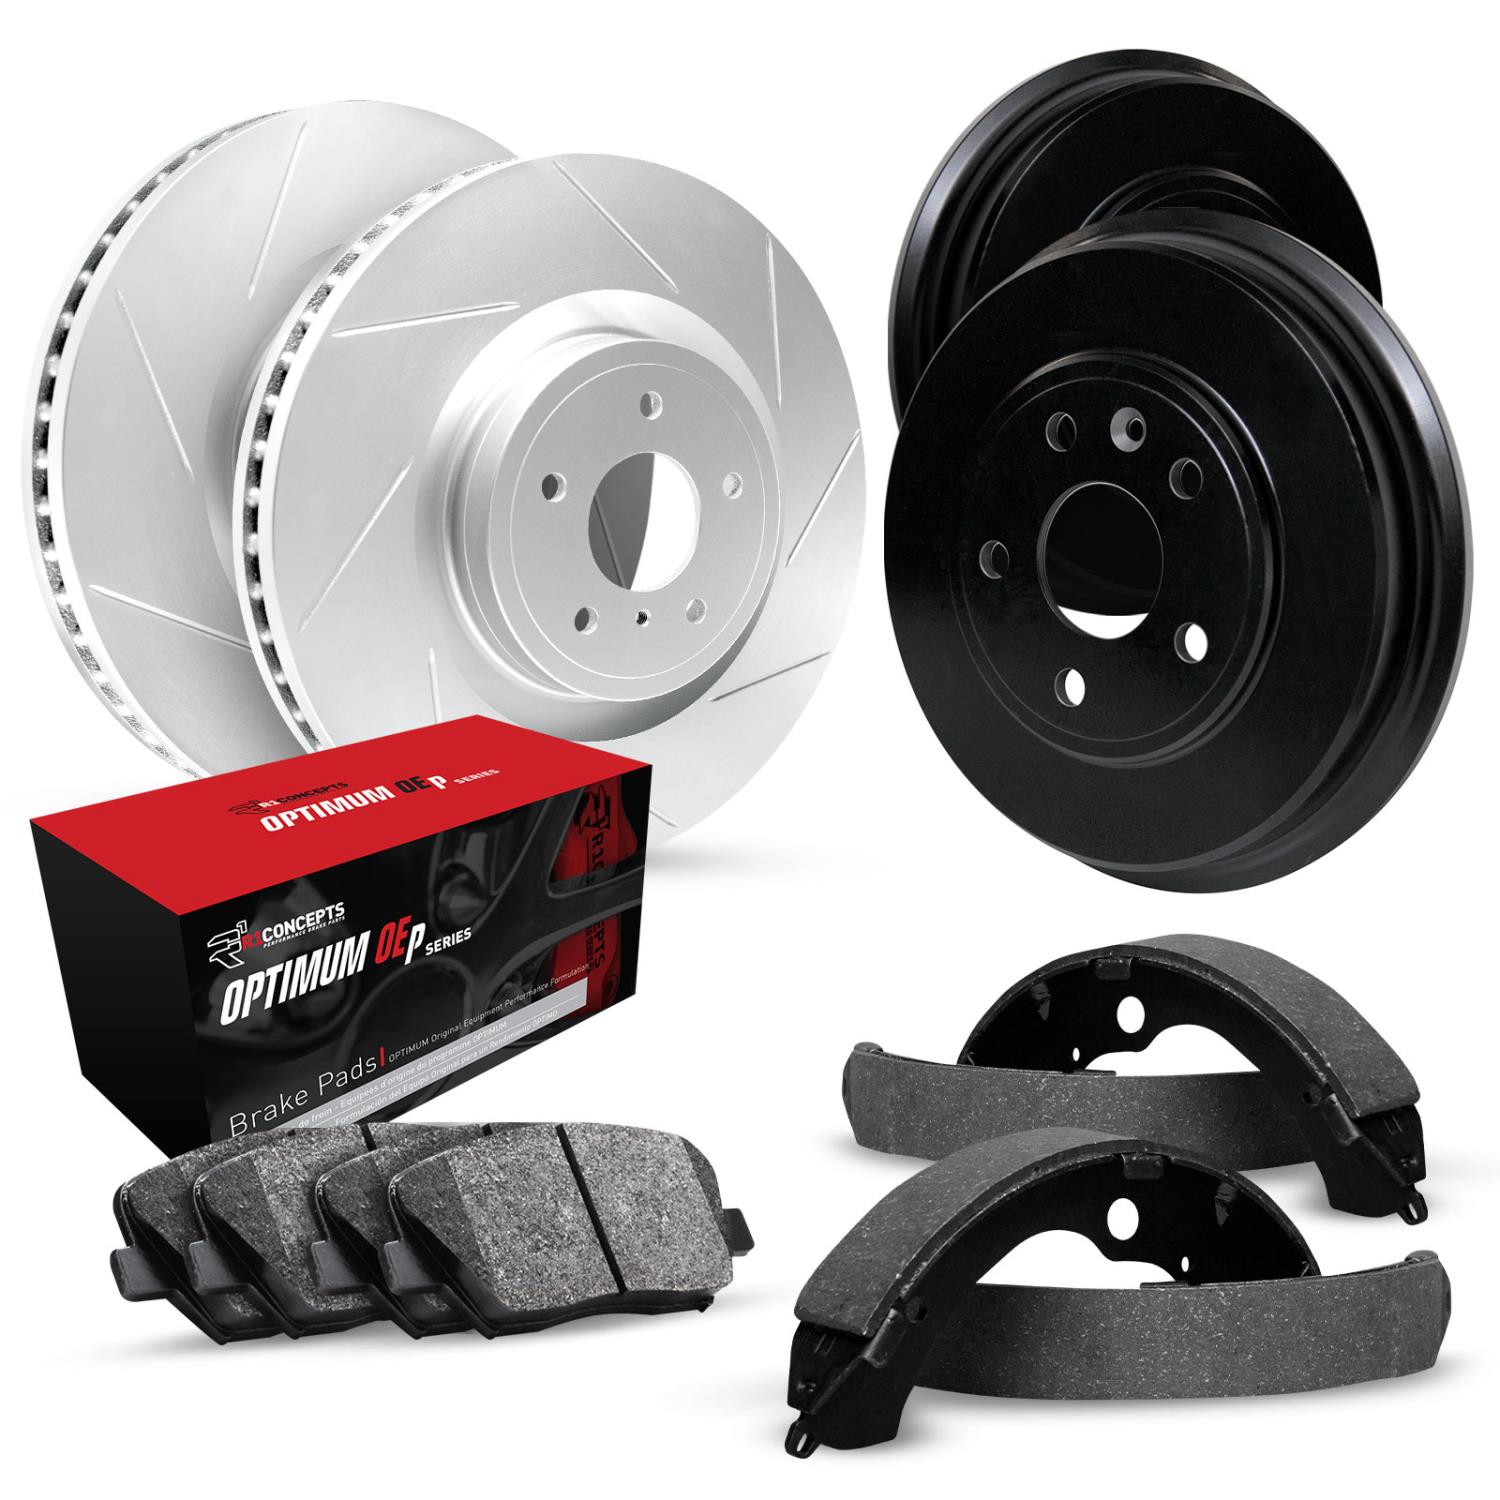 GEO-Carbon Slotted Brake Rotor & Drum Set w/Optimum OE Pads & Shoes, 1981-1991 GM, Position: Front & Rear